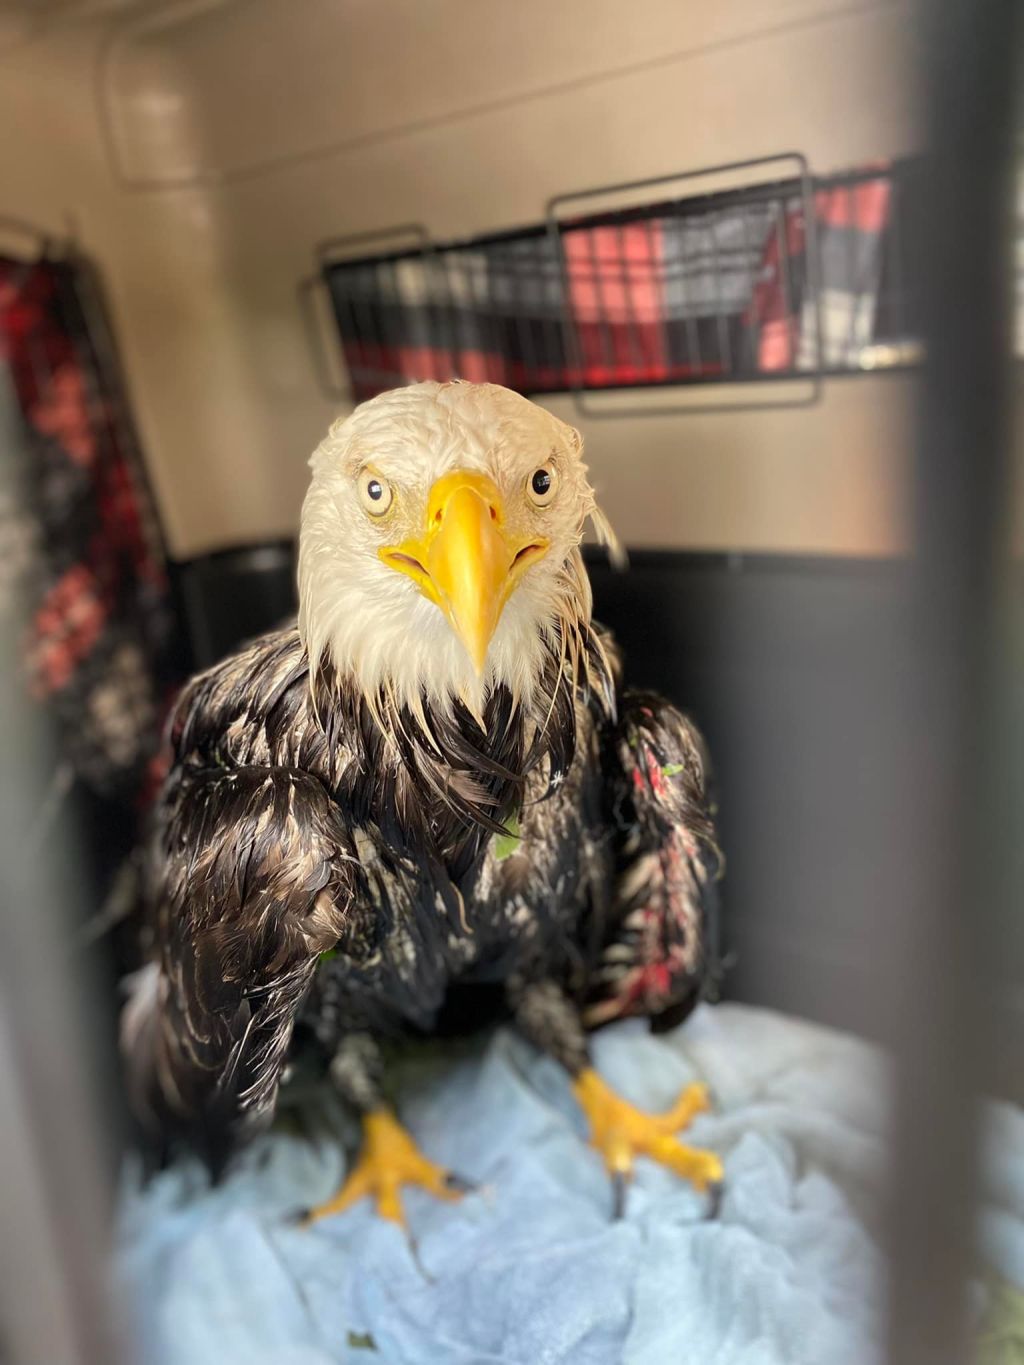 Photos: Injured bald eagle rescued from Massachusetts river bank